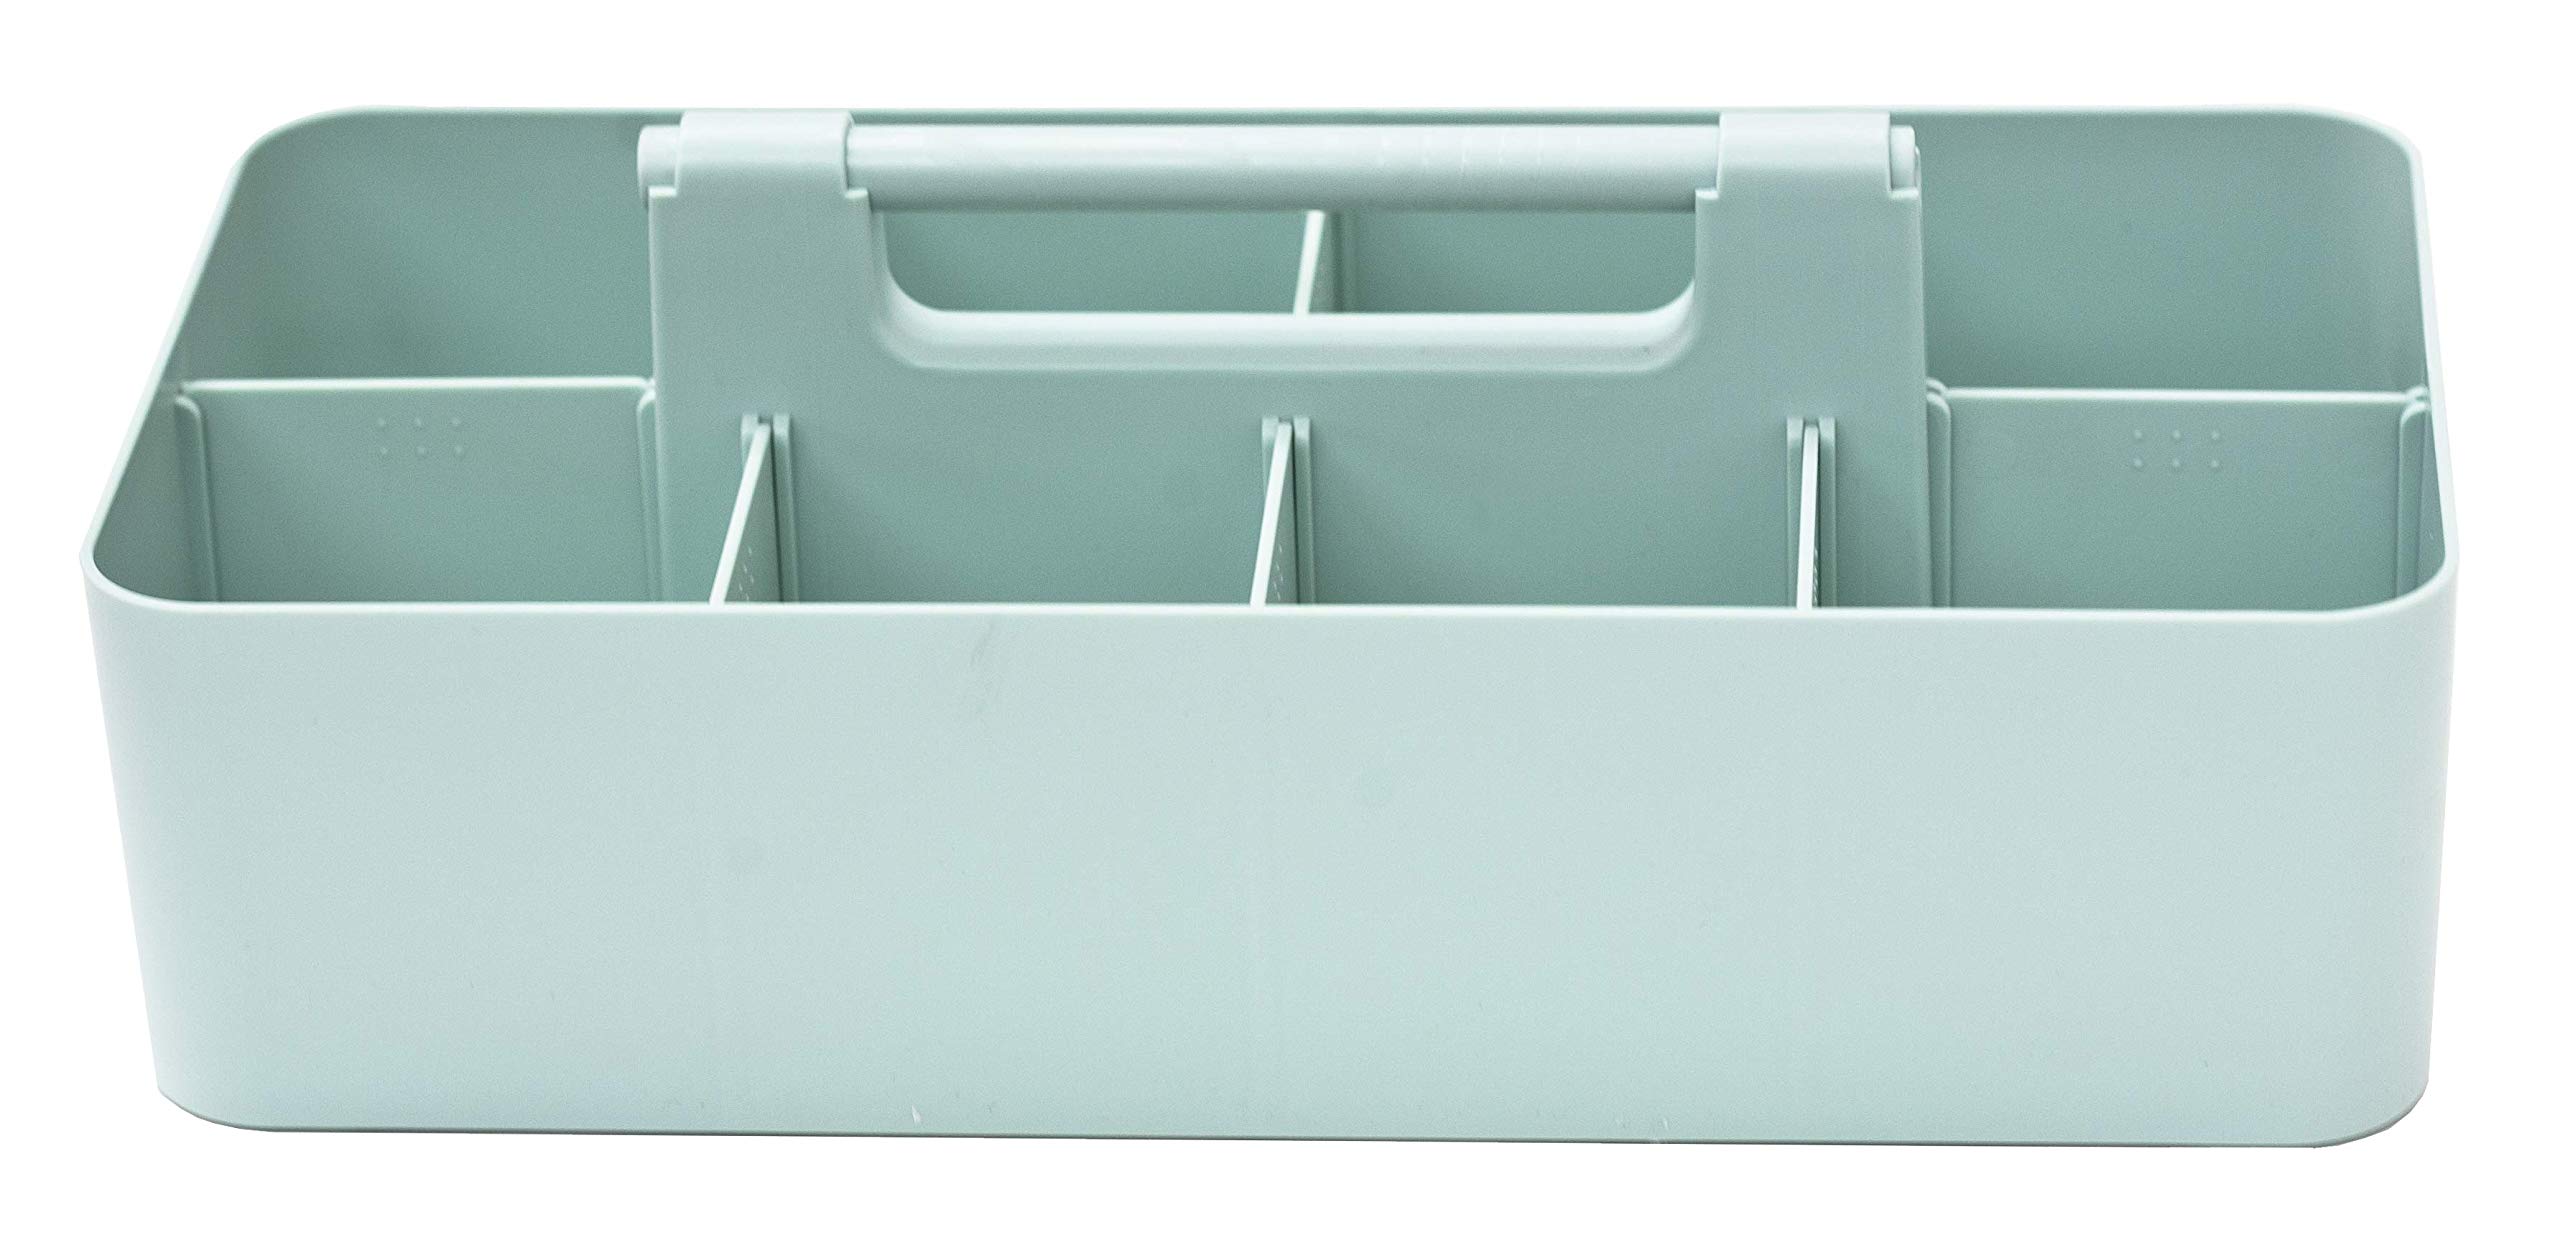 Casewin 4 Packs Plastic Storage Baskets with Handle – Rectangular Organiser  Storage Basket Storage Boxes for Kitchen, Cupboard, Office, School and